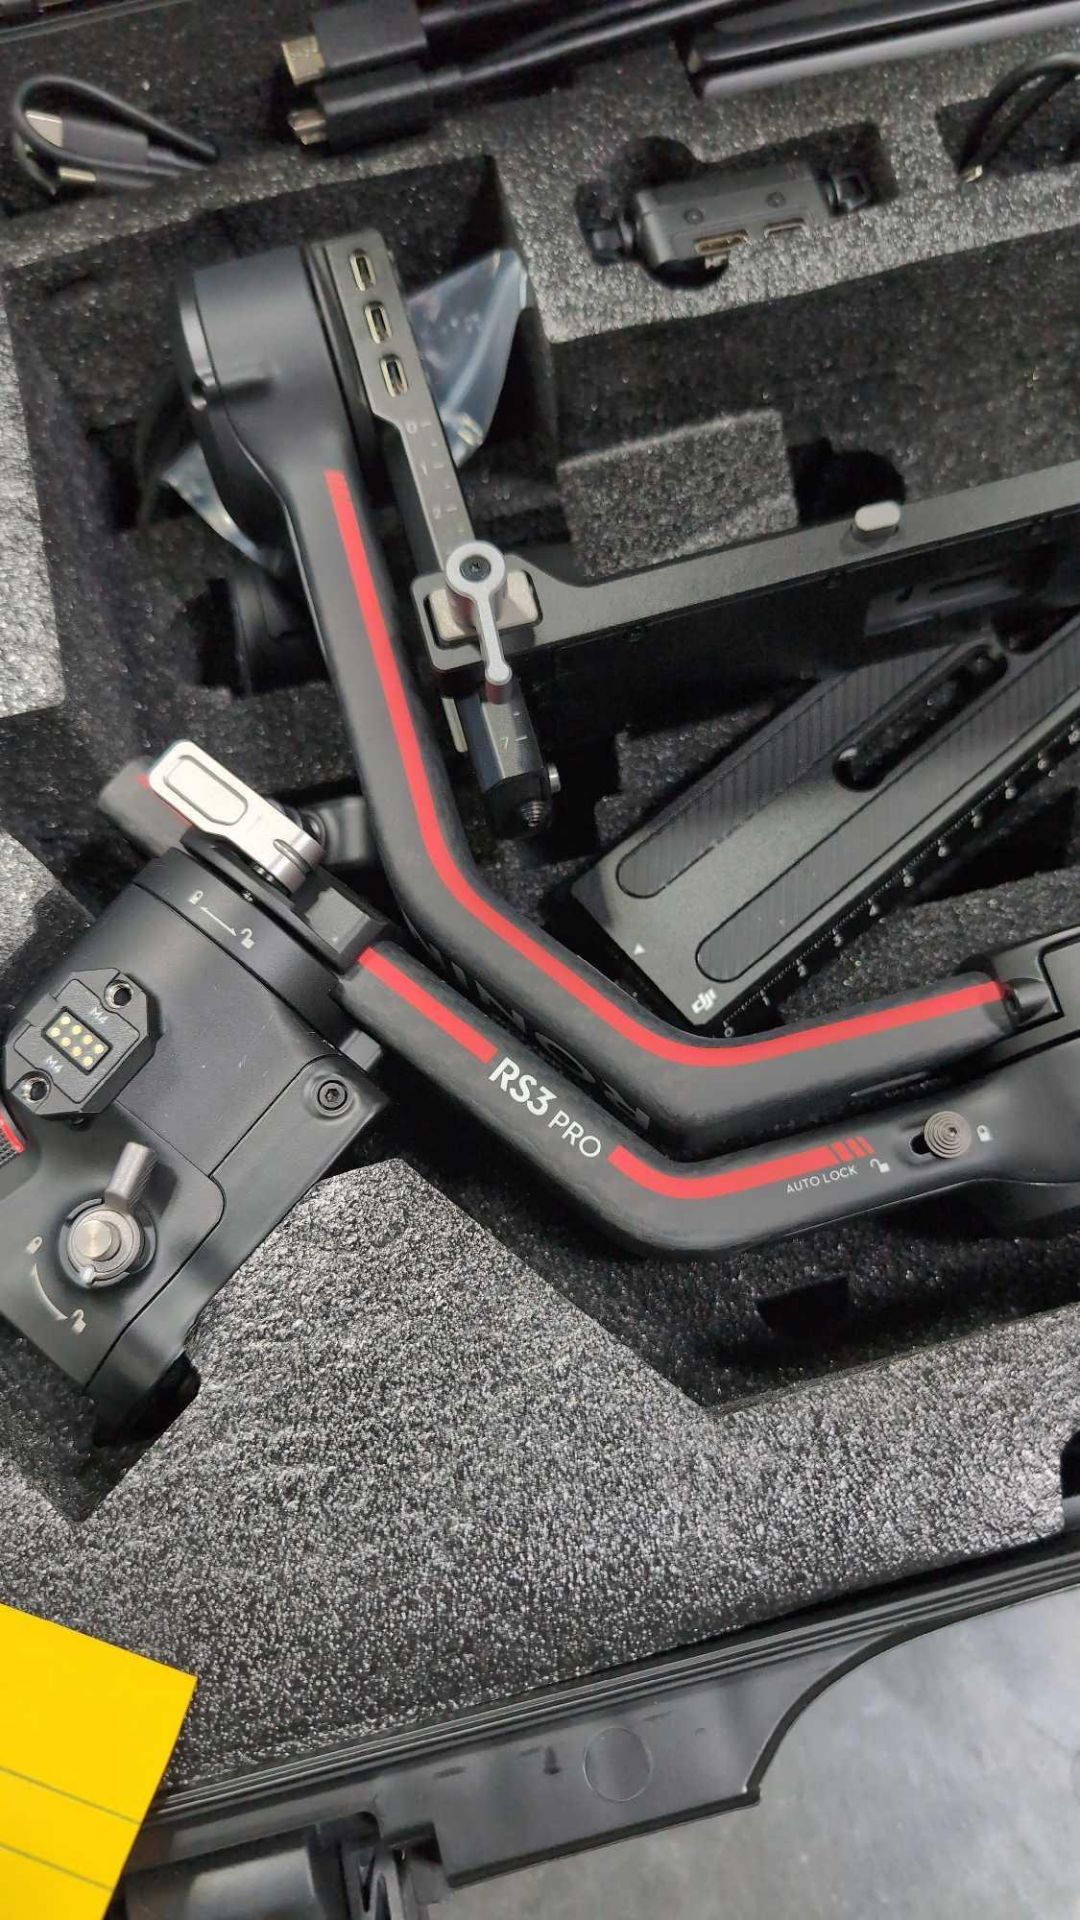 DJI Ronin rs3 pro with case - Image 3 of 4